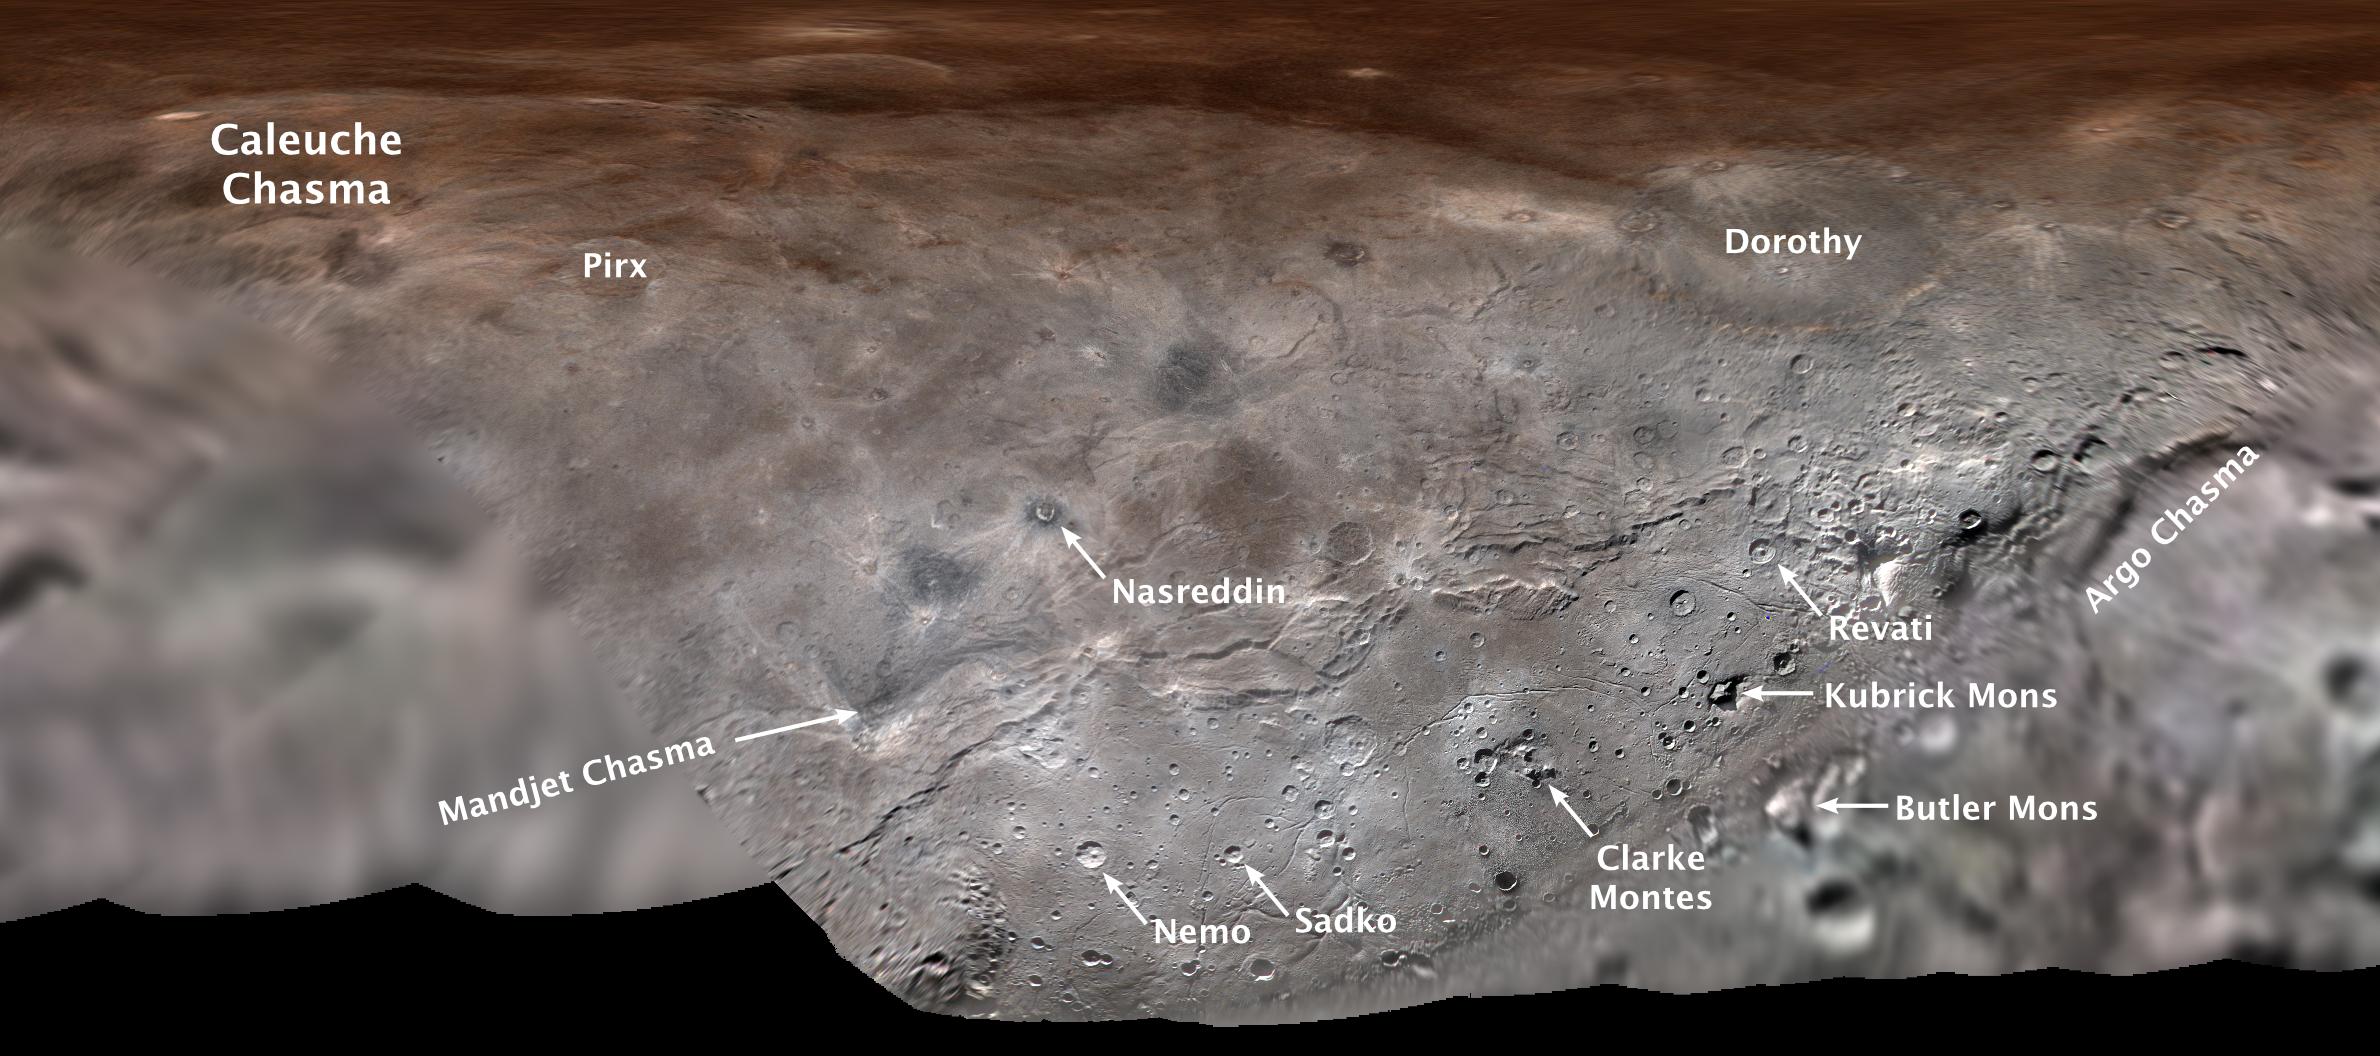 Flat map of Charon with feature names.